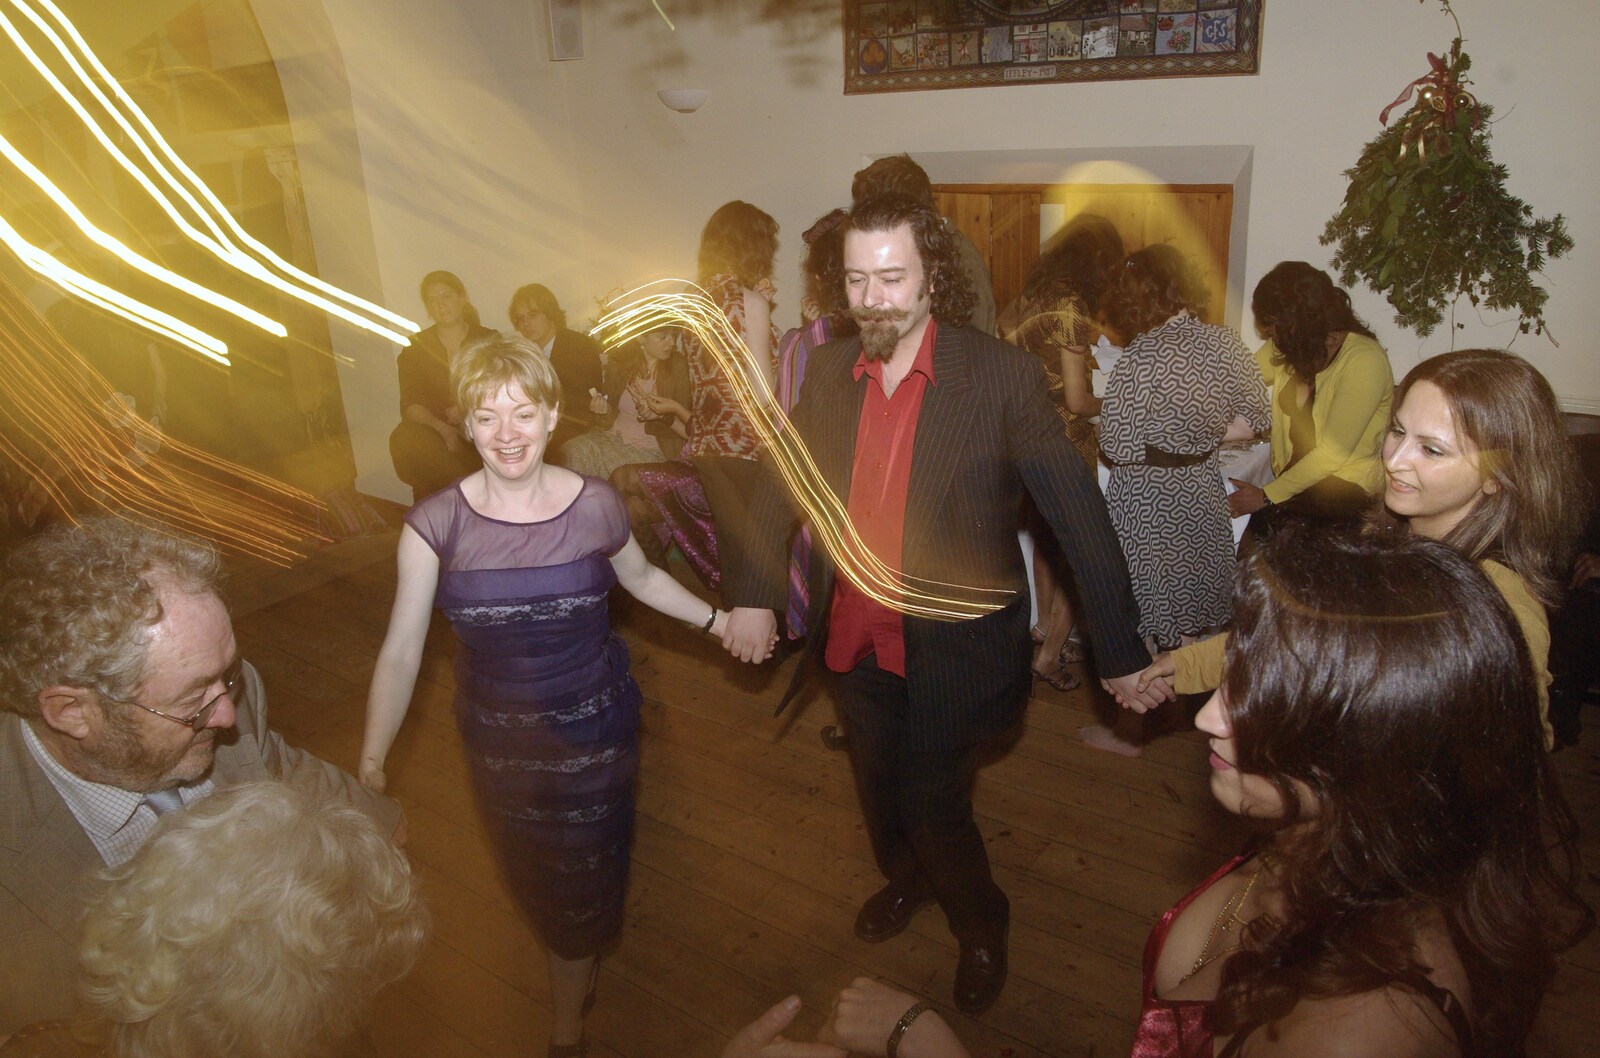 Abbie and Noddy dance from An Oxford Wedding, Iffley, Oxfordshire - 20th December 2008